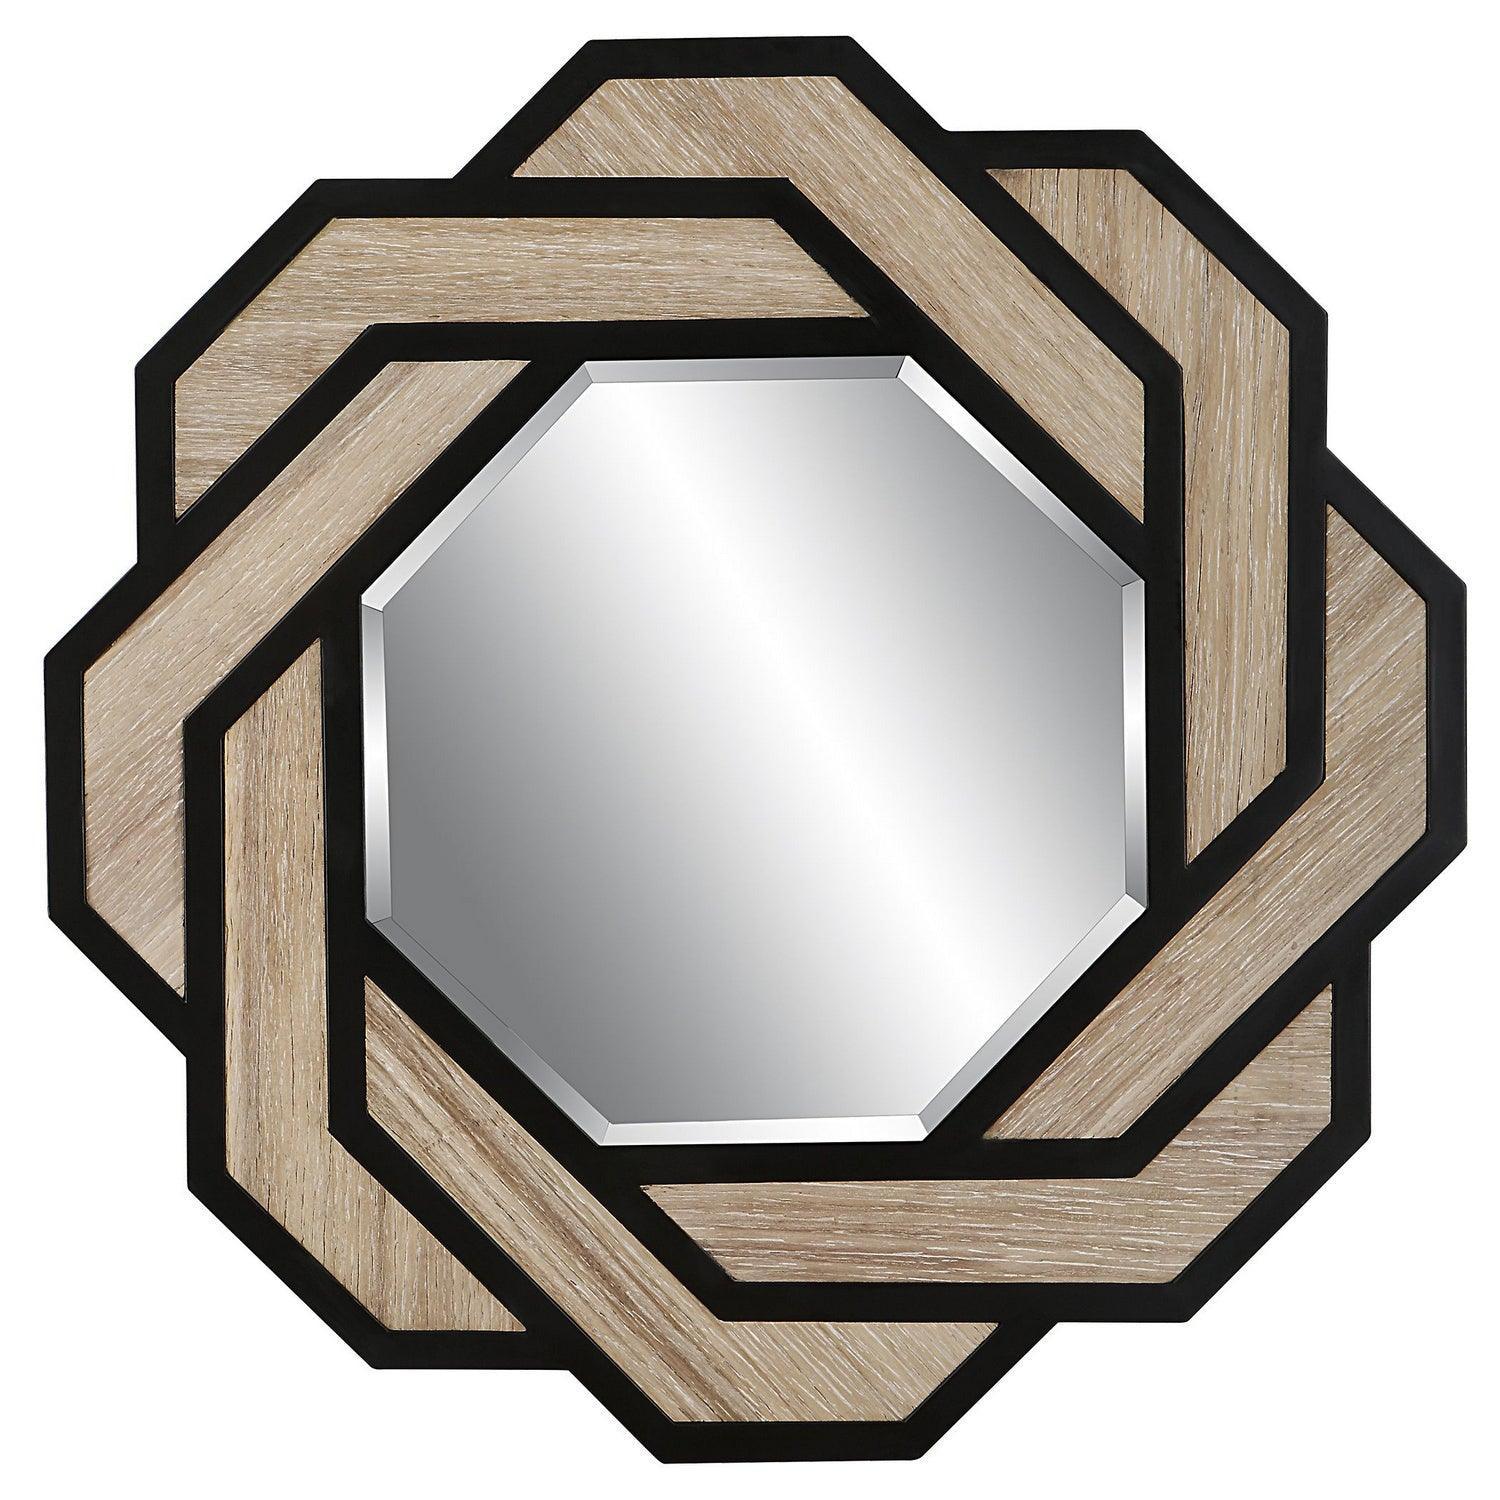 The Uttermost - Continuity Mirror - 09802 | Montreal Lighting & Hardware